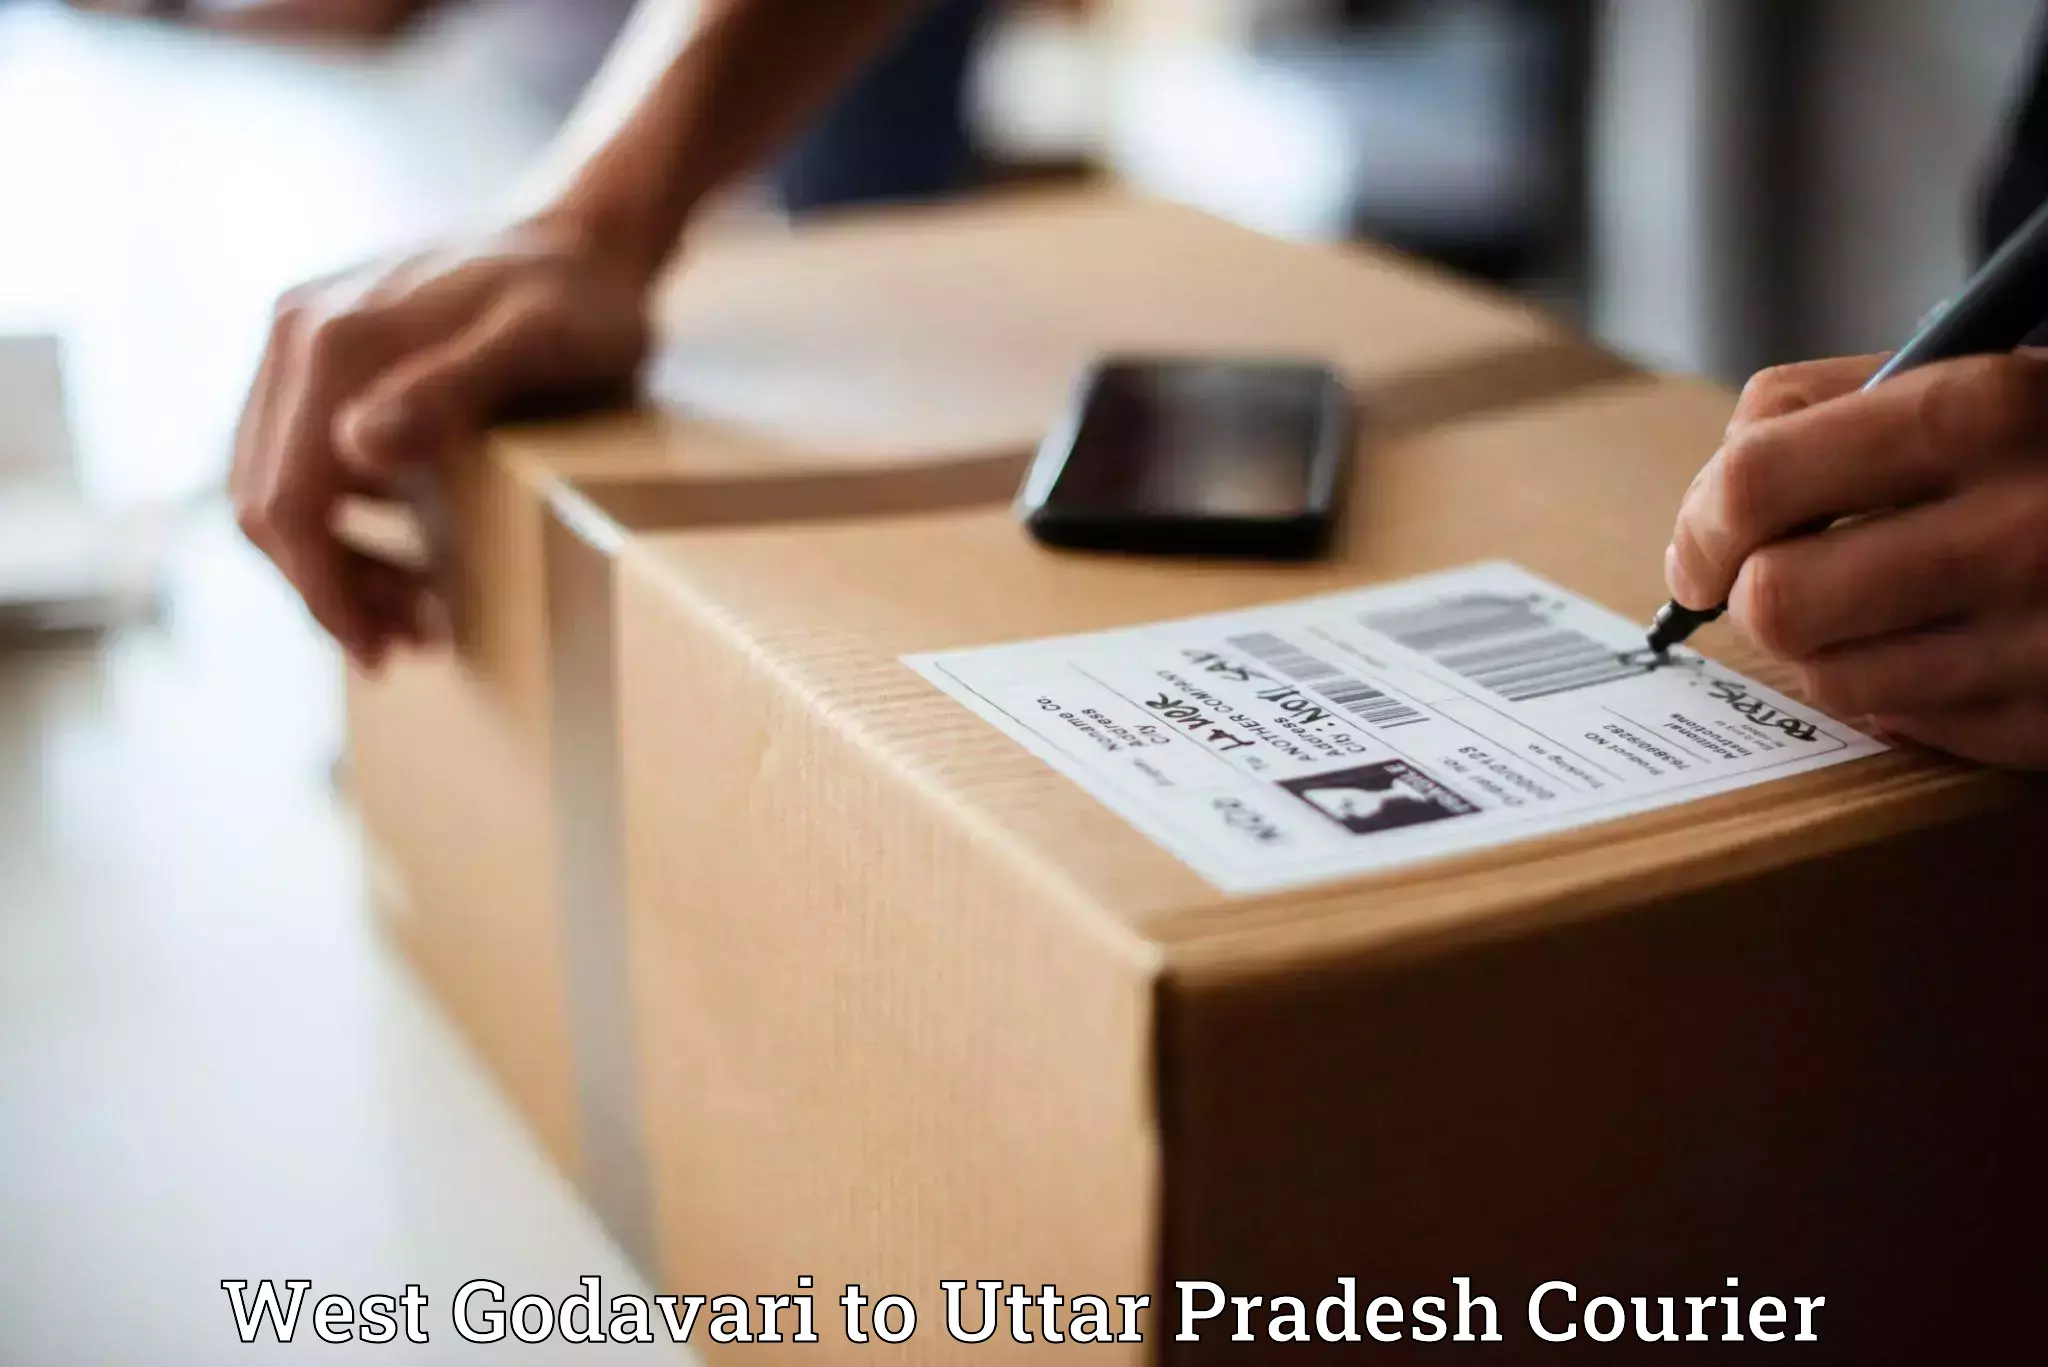 State-of-the-art courier technology West Godavari to Rasra